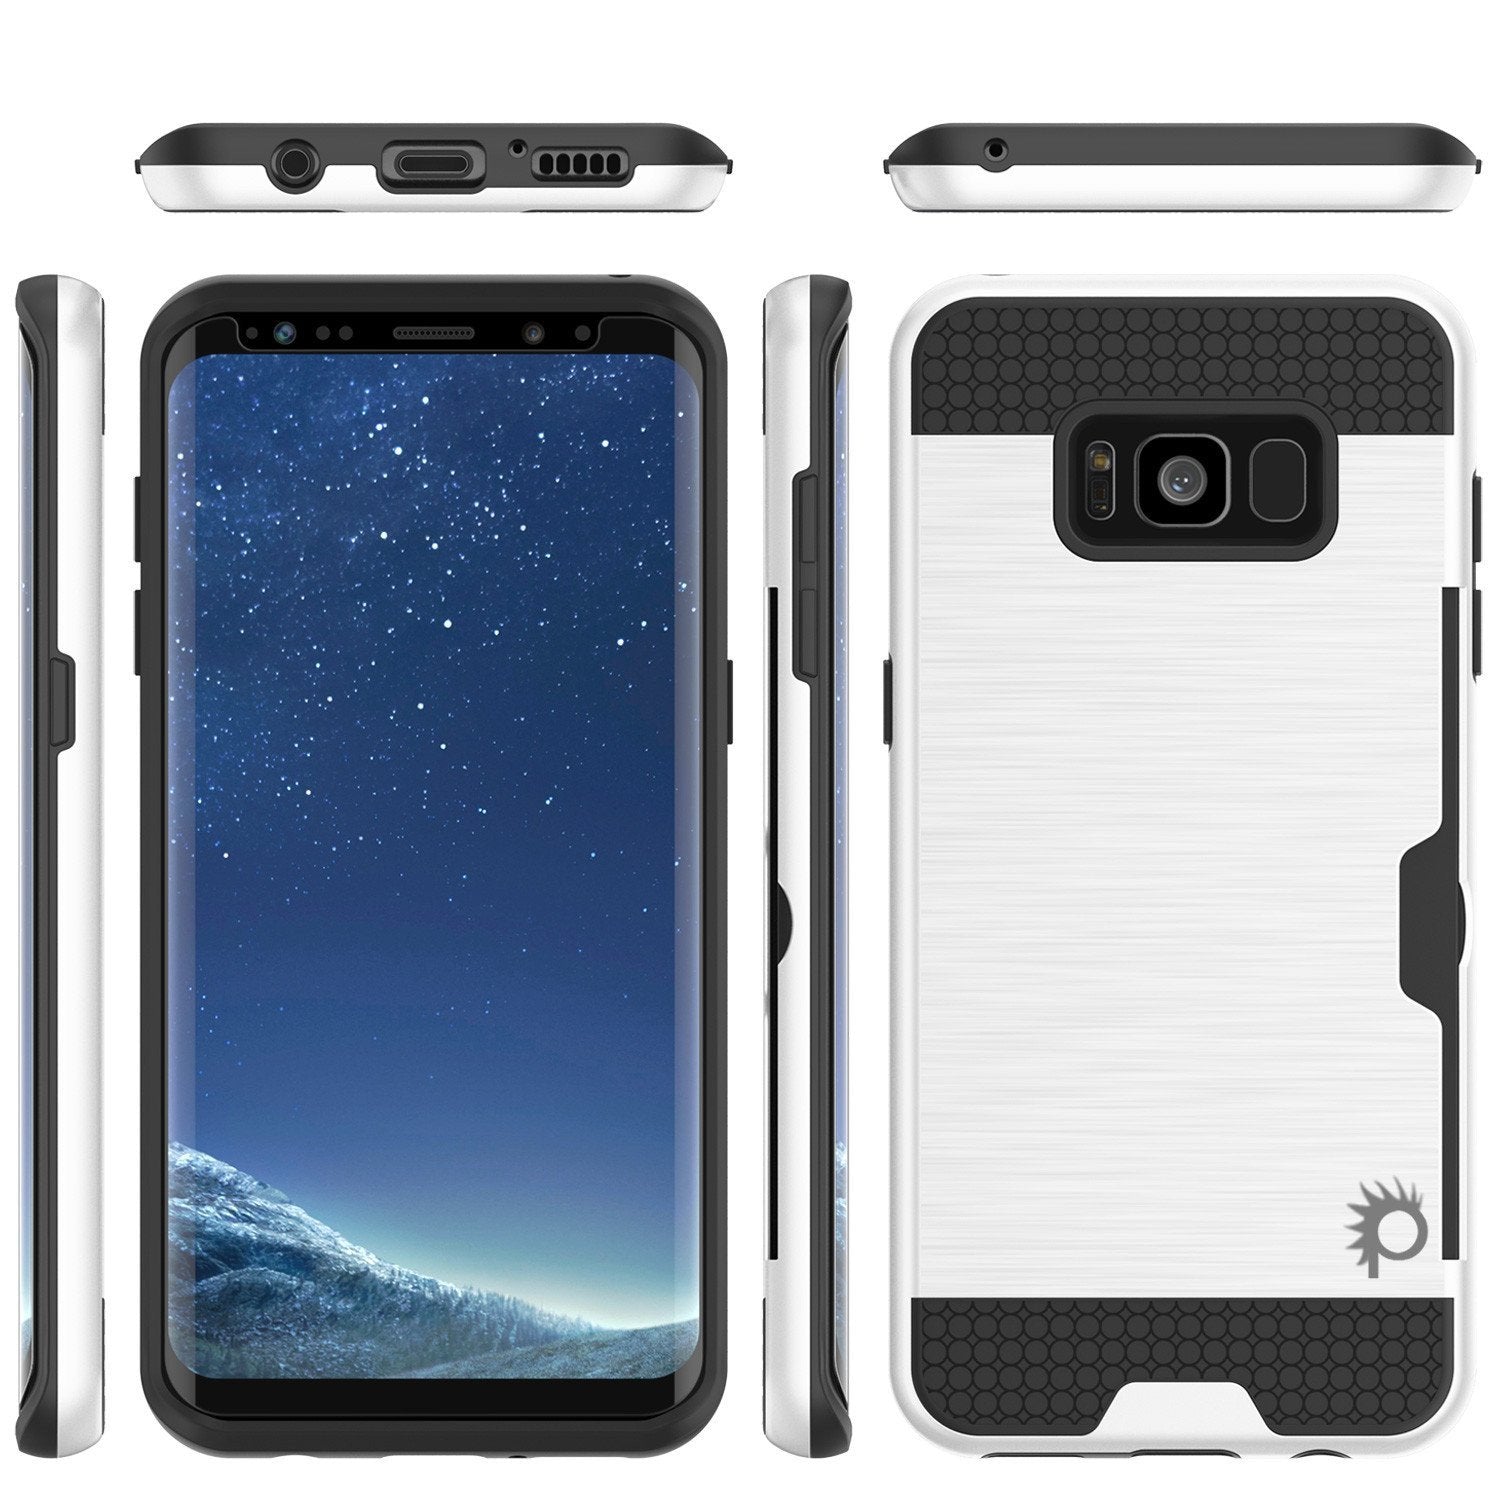 Galaxy S8 Case, PUNKcase [SLOT Series] [Slim Fit] Dual-Layer Armor Cover w/Integrated Anti-Shock System, Credit Card Slot & PUNKSHIELD Screen Protector for Samsung Galaxy S8[White] - PunkCase NZ